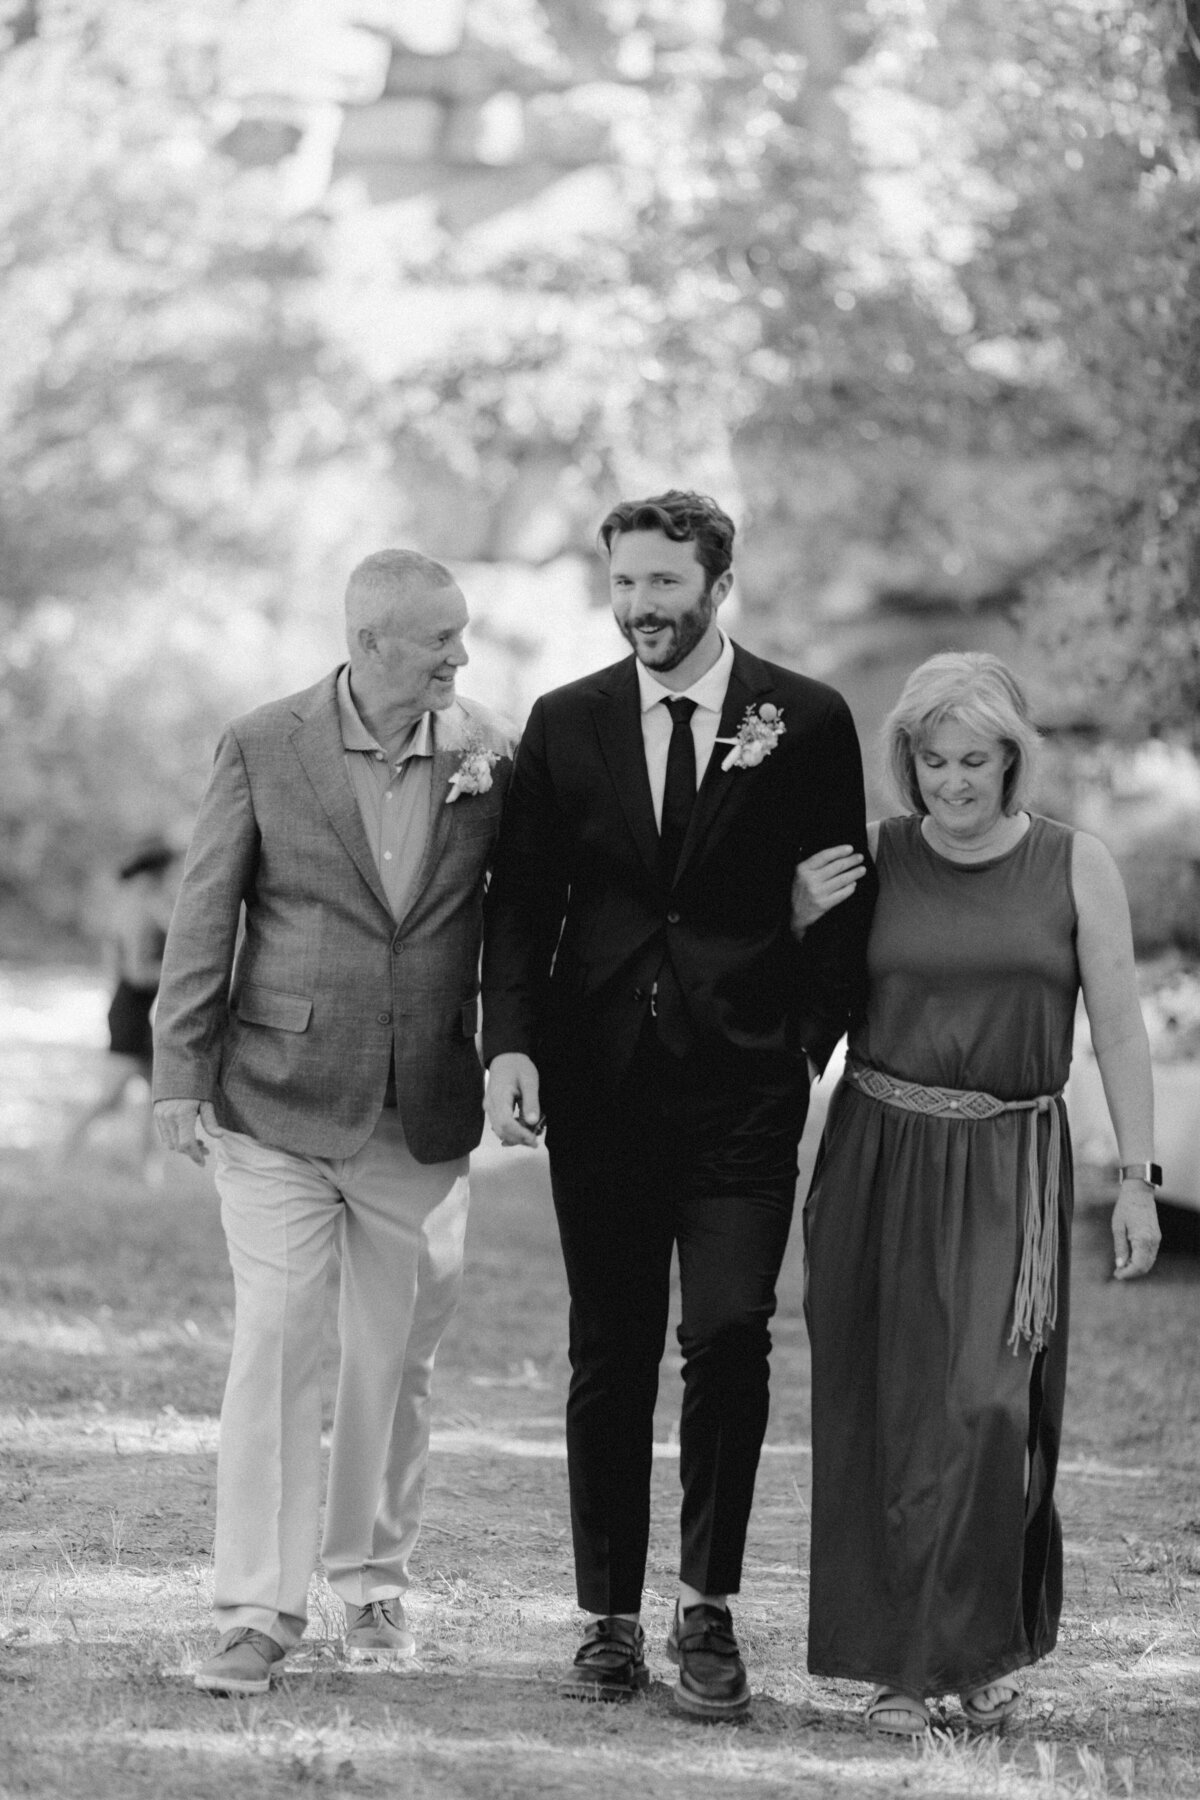 Groom walking along with parents on each arm